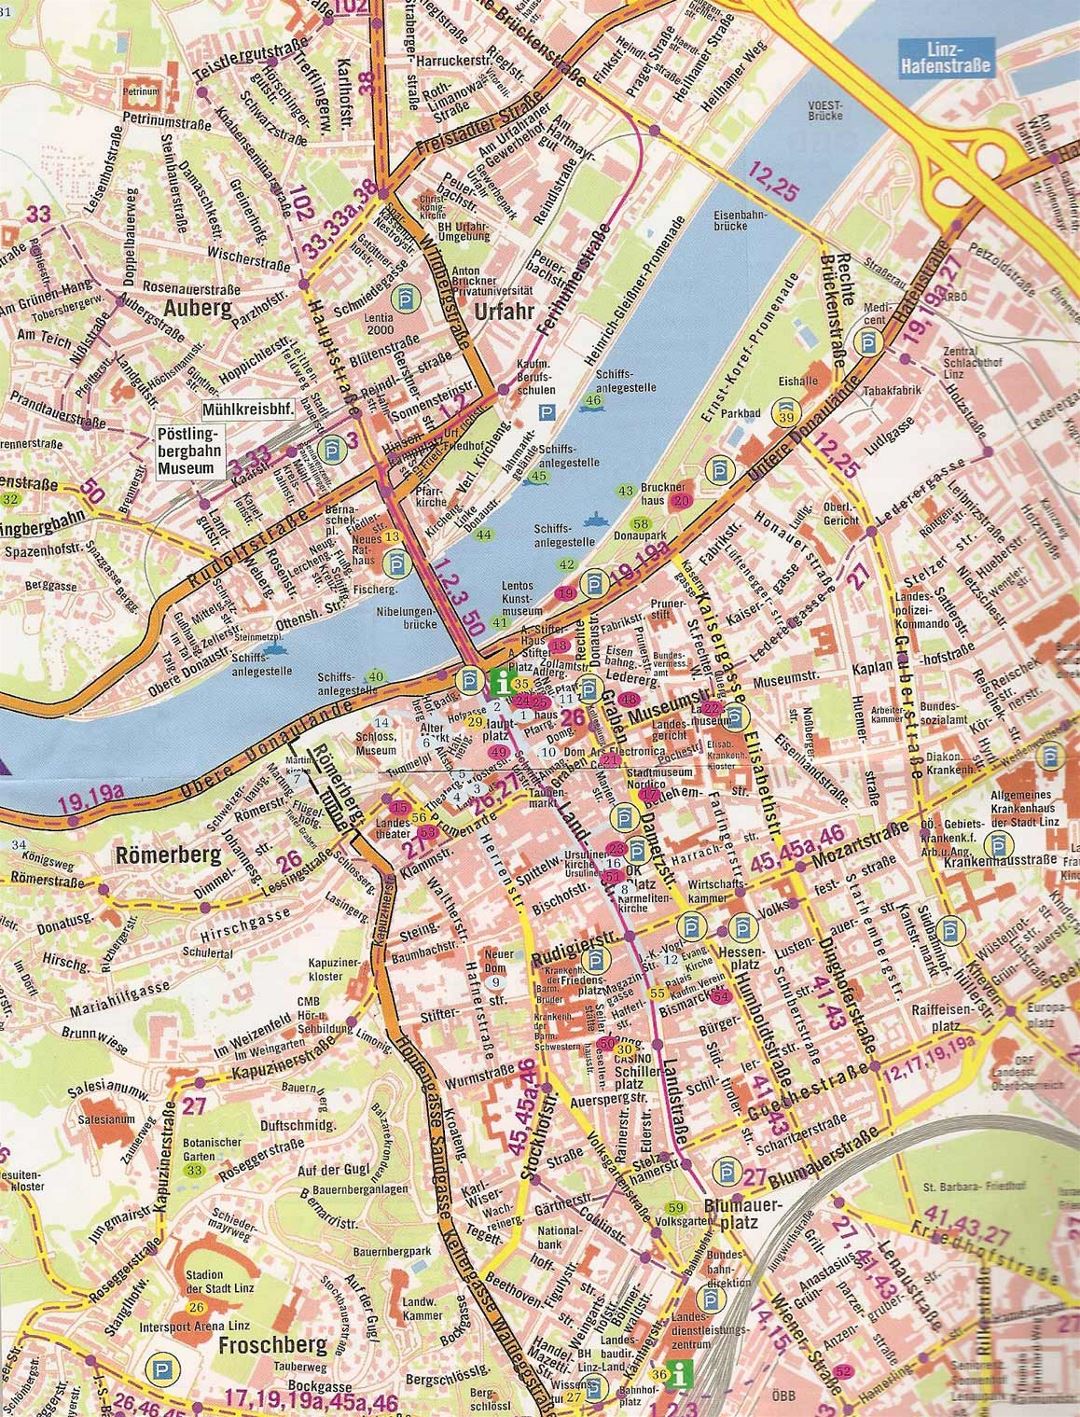 Road map of Linz city center